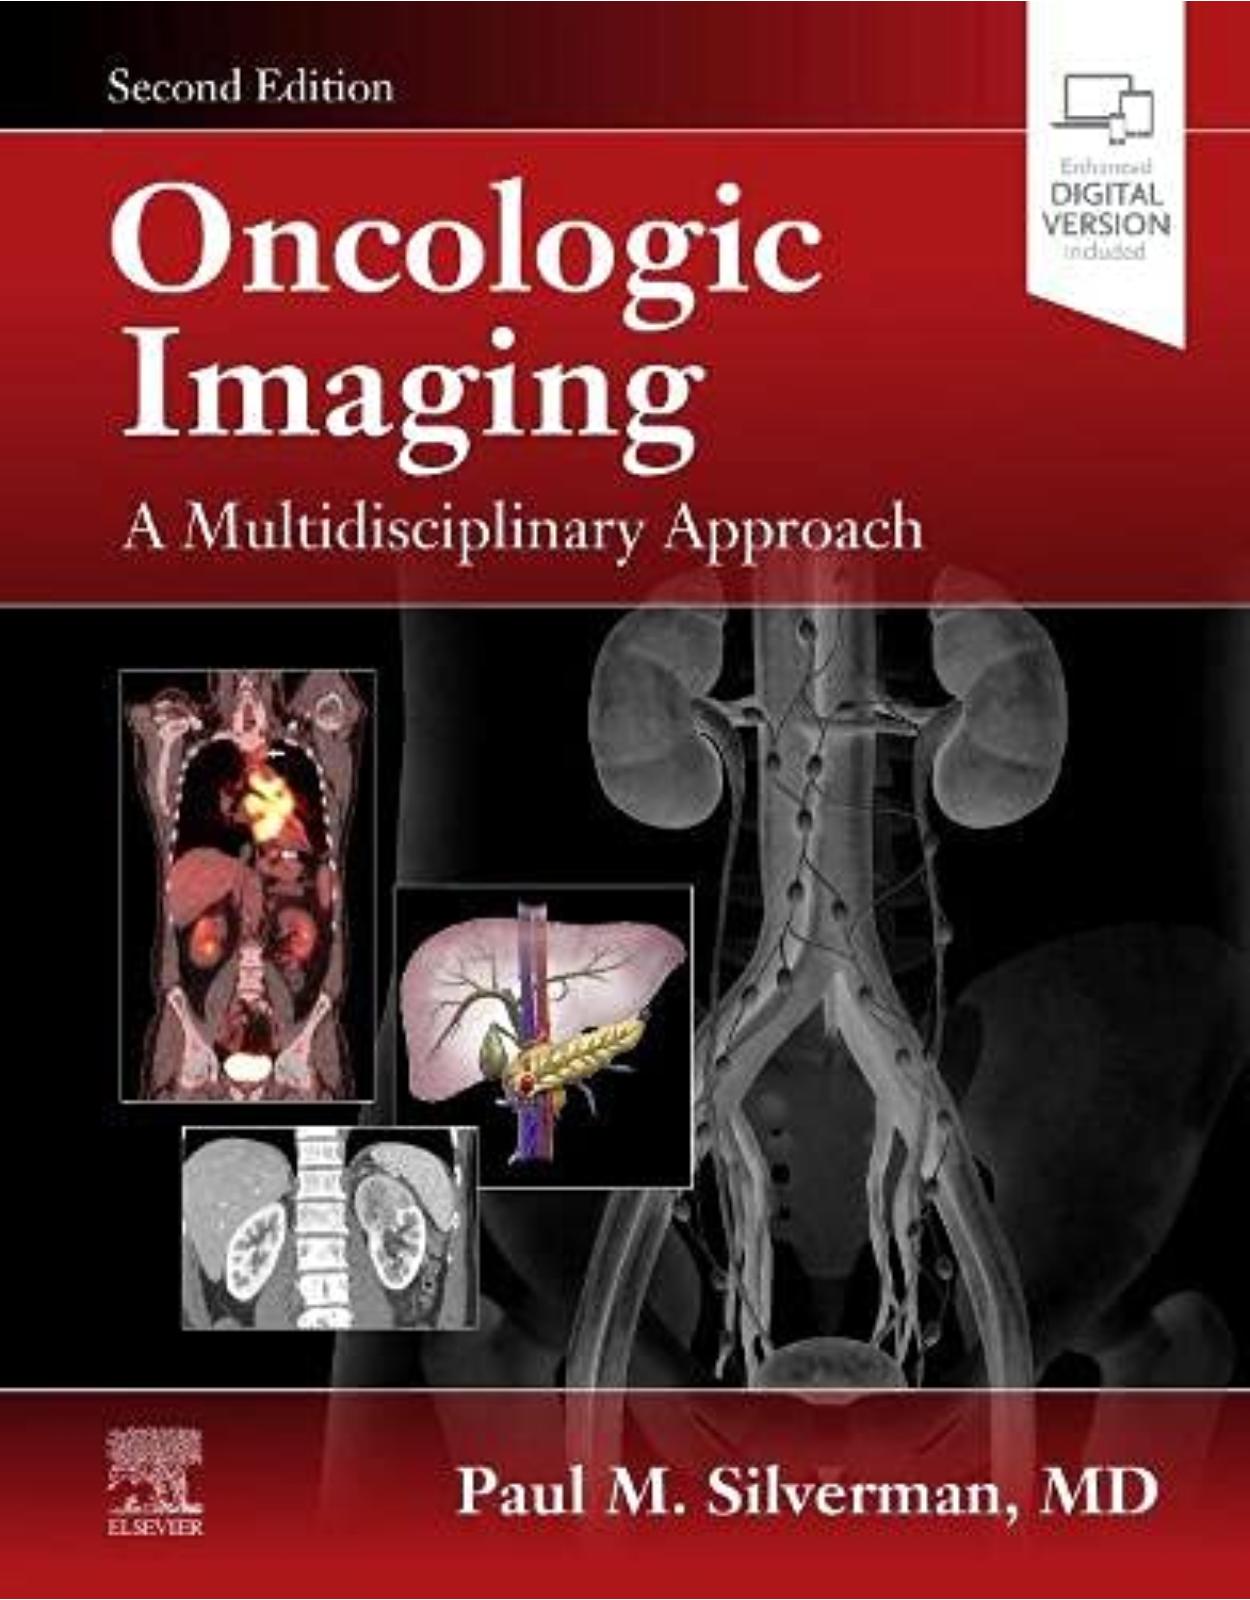 Oncologic Imaging: A Multidisciplinary Approach, 2nd Edition